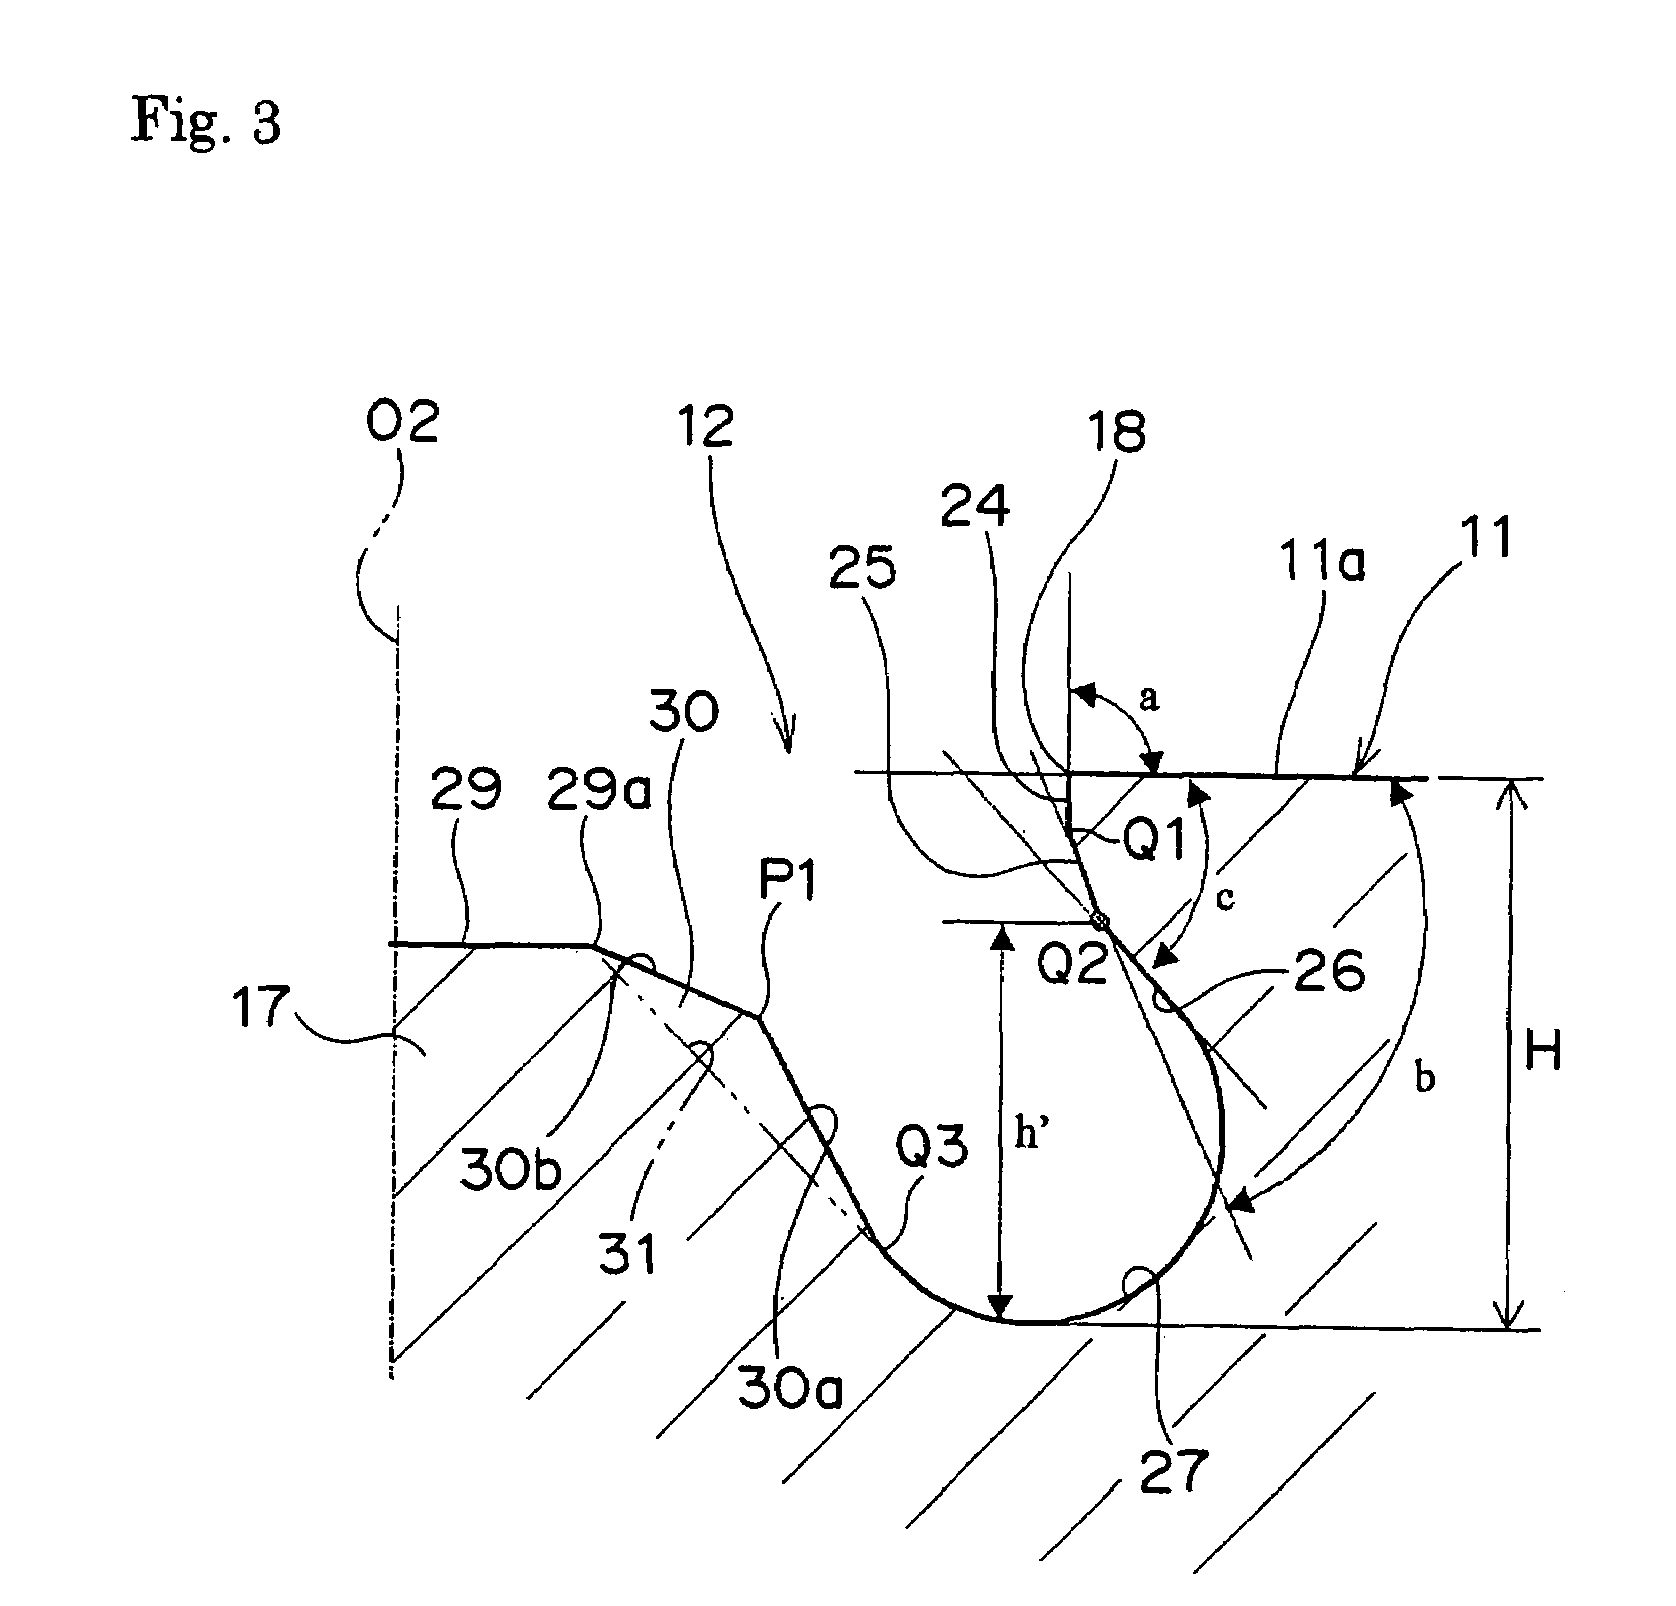 Shape of combustion chamber for direct-injection diesel engine